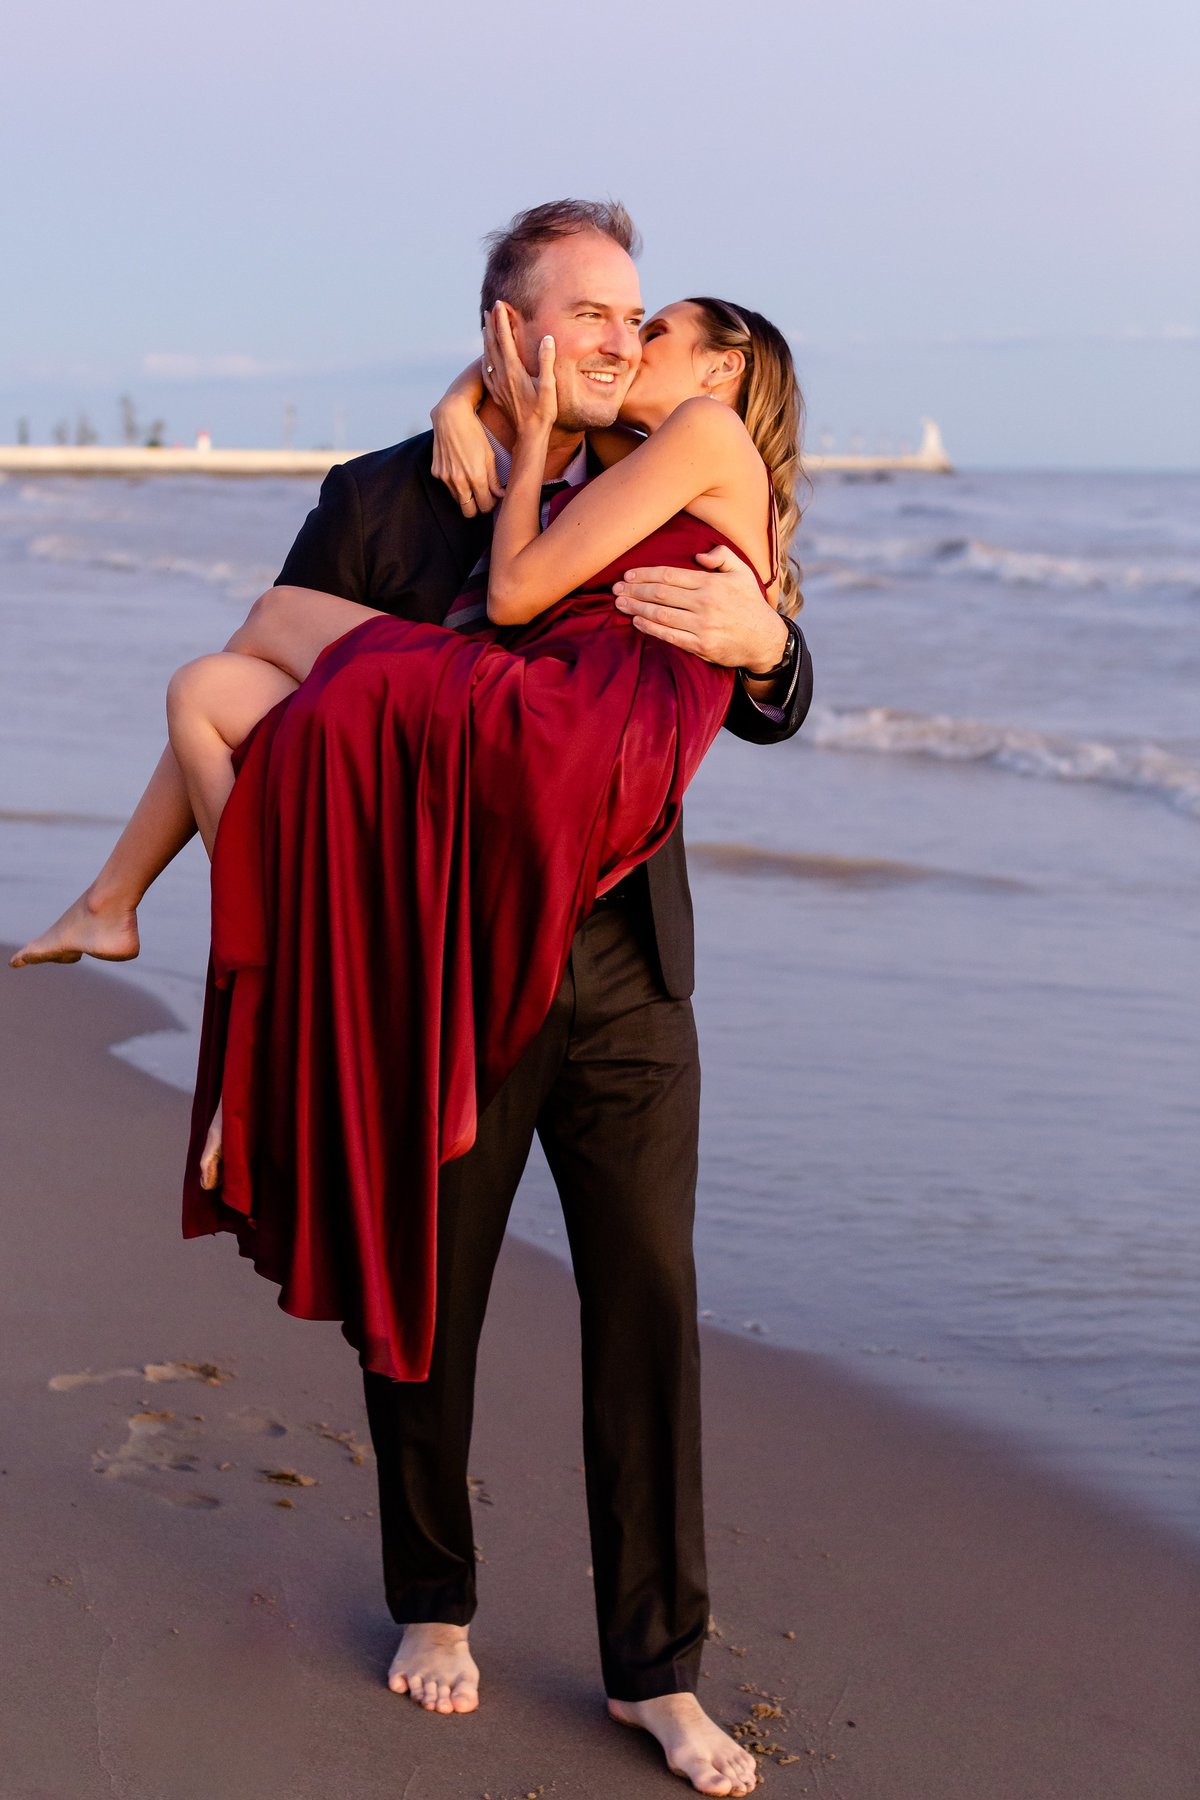 Handsome-guy-carries-his-future-wife-wearing-a-fancy-red-dress-on-port-stanley-beach-during-their-sunset-engagement-session